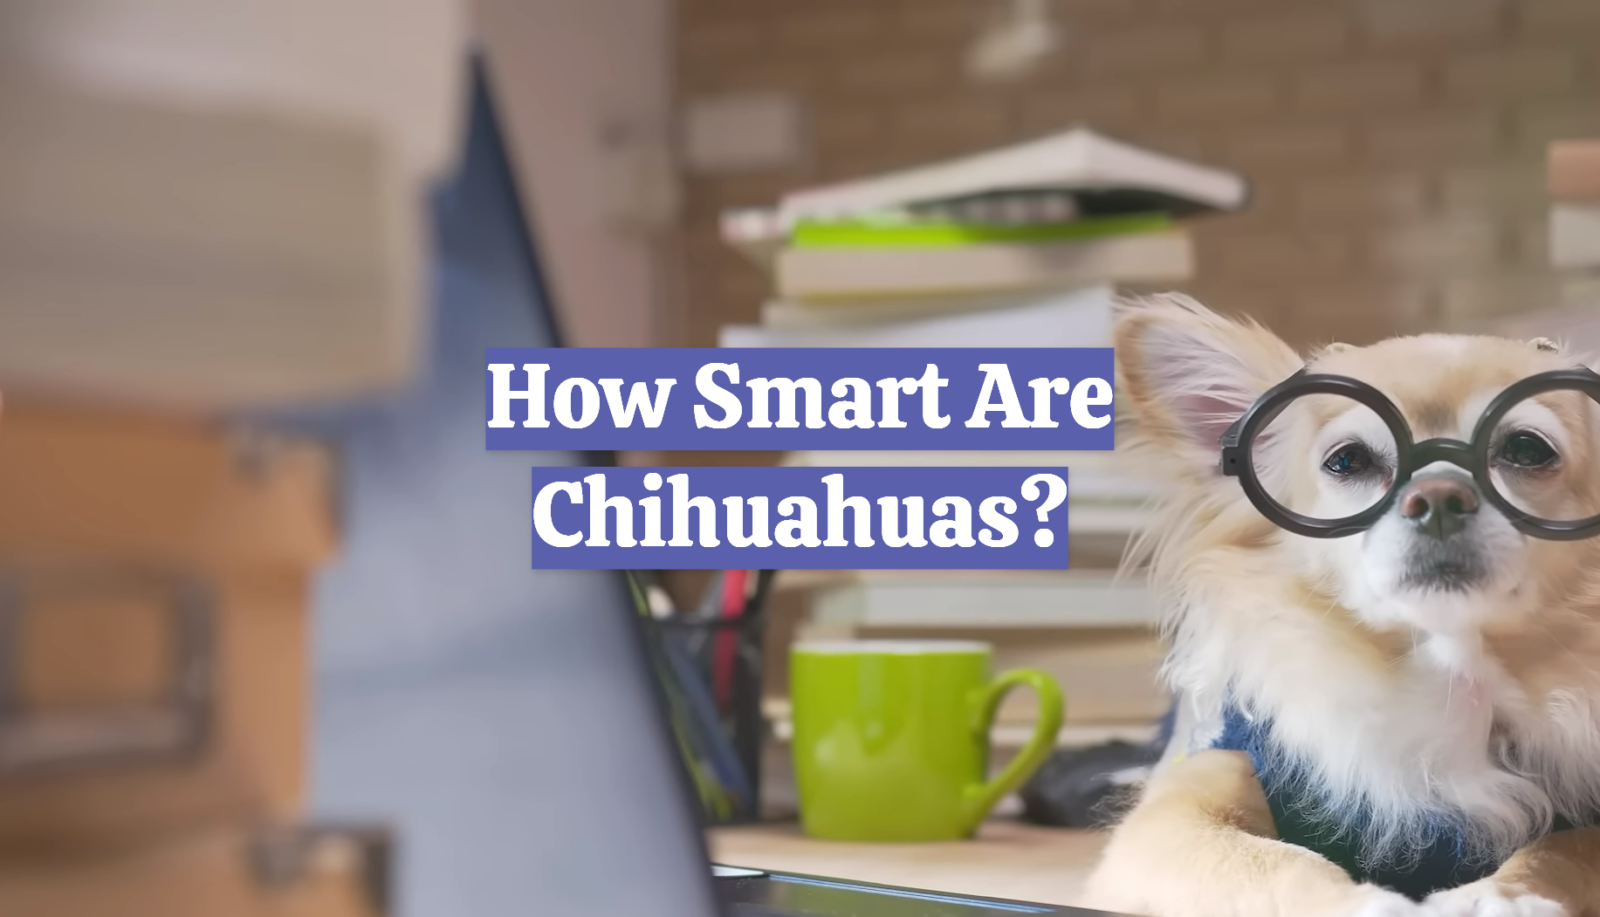 How Smart Are Chihuahuas?